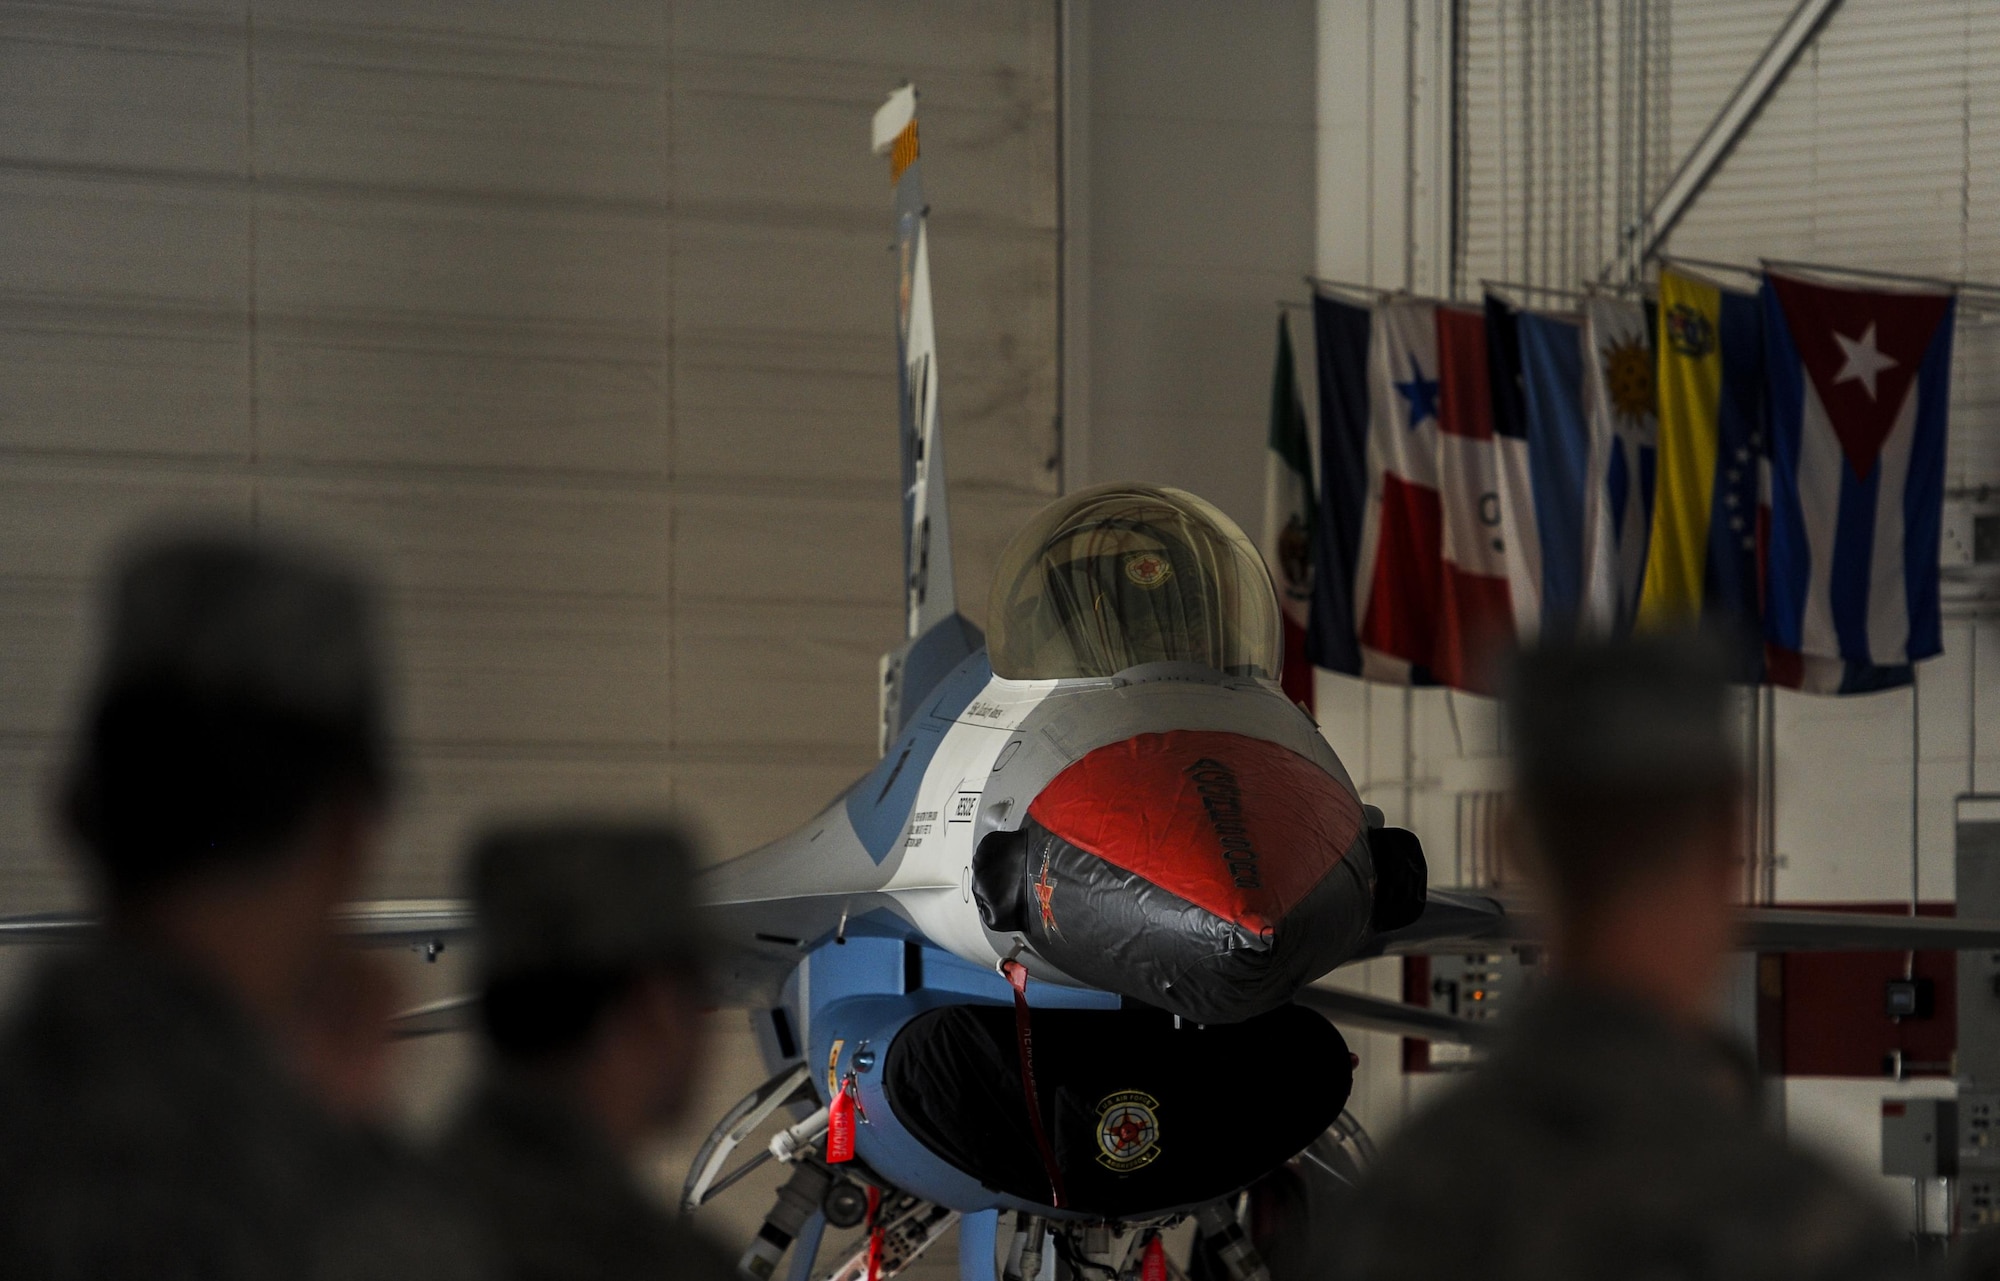 An F-16 Fighting Falcon, assigned to the 64th Aggressor Squadron, with the new “splinter” paint scheme sits in the U.S. Air Force Thunderbird hangar at Nellis Air Force Base, Nev., during the 57th Adversary Tactics Group change of command ceremony Aug. 5, 2016. The new paint scheme for the F-16 will serve as the closest representation of real world threats for pilots who train at Nellis AFB. (U.S. Air Force photo by Airman 1st Class Kevin Tanenbaum/Released)